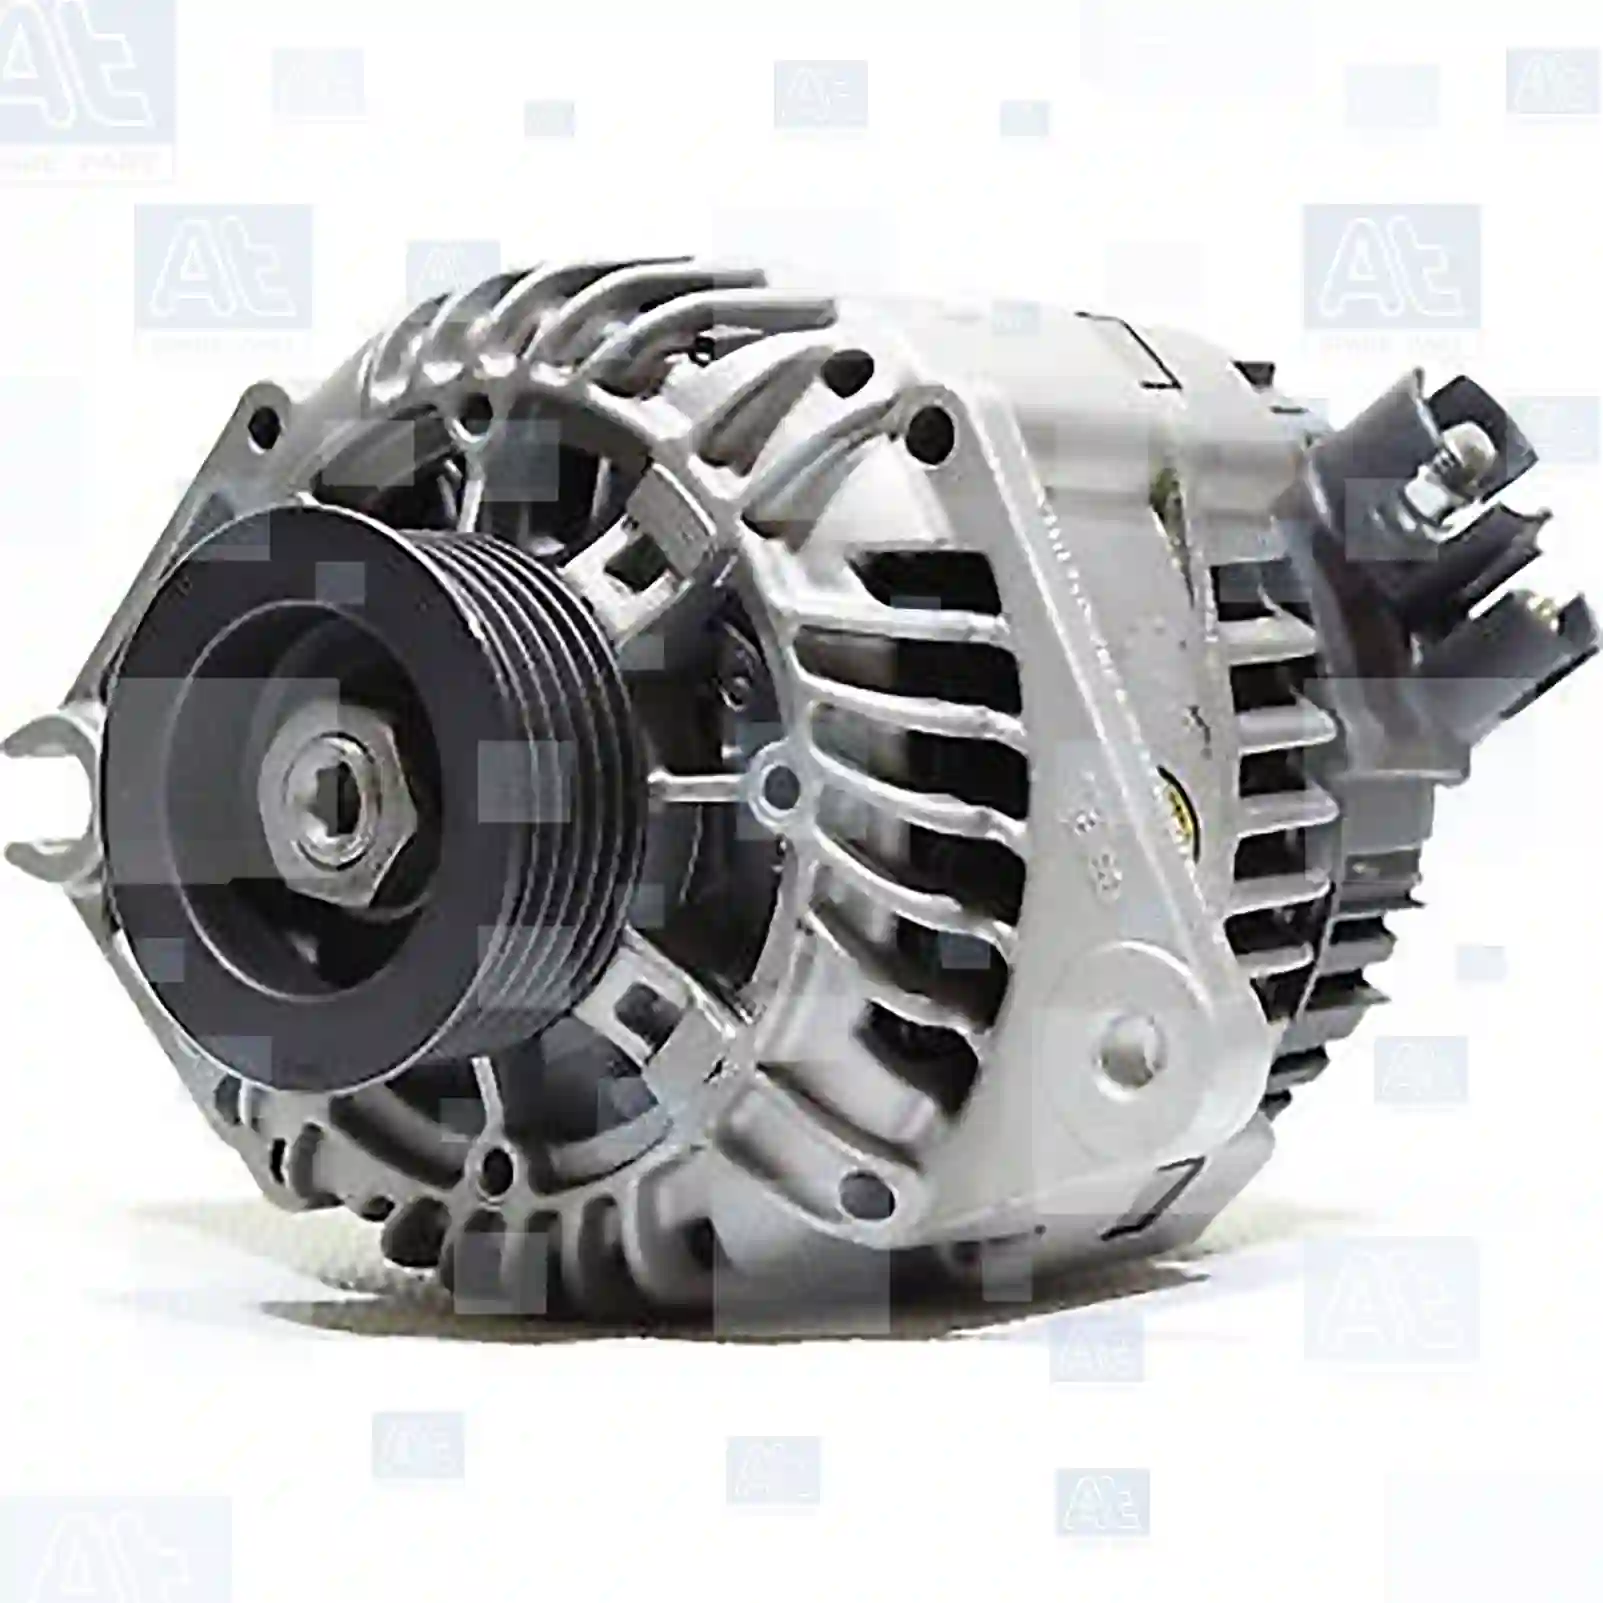 Alternator, at no 77711543, oem no: 5701C3, 5701D9, 57051V, 57052N, 5705E3, 5705E4, 5705E5, 5705F3, 5705F4, 5705F5, 5705F6, 5705F7, 5705G2, 5705G6, 5705G9, 5705H6, 5705H8, 5705H9, 5705HF, 5705HP, 5705HQ, 5705HX, 5705J0, 5705J1, 5705JR, 5705K5, 5705K9, 5705N6, 5705T6, 5705T8, 5705Y1, 5705Y2, 5706F3, 59622N, 9566774580, 9607641280, 9612256180, 9612259680, 9612259880, 9612262680, 9612264280, 9612264380, 9612264680, 9612264880, 9613496680, 1516603, 9612259680, 9612259680, 9612259880, 9612264380, 9612259680, 9612264280, SA434, SA467, SA956, 943356568, 944356567, 944356944, 944356967, 944356976, 5701C3, 5701D9, 57051V, 57052N, 5705E3, 5705E4, 5705E5, 5705F3, 5705F4, 5705F5, 5705F6, 5705F7, 5705G2, 5705G6, 5705G9, 5705H6, 5705H8, 5705H9, 5705HF, 5705HP, 5705HQ, 5705HX, 5705J0, 5705J1, 5705JR, 5705K5, 5705K9, 5705N6, 5705T6, 5705T8, 5705Y1, 5705Y2, 5706F3, 59622N, 9566774580, 9607641280, 9612256180, 9612259680, 9612259880, 9612262680, 9612264280, 9612264380, 9612264680, 9612264880, 9613496680 At Spare Part | Engine, Accelerator Pedal, Camshaft, Connecting Rod, Crankcase, Crankshaft, Cylinder Head, Engine Suspension Mountings, Exhaust Manifold, Exhaust Gas Recirculation, Filter Kits, Flywheel Housing, General Overhaul Kits, Engine, Intake Manifold, Oil Cleaner, Oil Cooler, Oil Filter, Oil Pump, Oil Sump, Piston & Liner, Sensor & Switch, Timing Case, Turbocharger, Cooling System, Belt Tensioner, Coolant Filter, Coolant Pipe, Corrosion Prevention Agent, Drive, Expansion Tank, Fan, Intercooler, Monitors & Gauges, Radiator, Thermostat, V-Belt / Timing belt, Water Pump, Fuel System, Electronical Injector Unit, Feed Pump, Fuel Filter, cpl., Fuel Gauge Sender,  Fuel Line, Fuel Pump, Fuel Tank, Injection Line Kit, Injection Pump, Exhaust System, Clutch & Pedal, Gearbox, Propeller Shaft, Axles, Brake System, Hubs & Wheels, Suspension, Leaf Spring, Universal Parts / Accessories, Steering, Electrical System, Cabin Alternator, at no 77711543, oem no: 5701C3, 5701D9, 57051V, 57052N, 5705E3, 5705E4, 5705E5, 5705F3, 5705F4, 5705F5, 5705F6, 5705F7, 5705G2, 5705G6, 5705G9, 5705H6, 5705H8, 5705H9, 5705HF, 5705HP, 5705HQ, 5705HX, 5705J0, 5705J1, 5705JR, 5705K5, 5705K9, 5705N6, 5705T6, 5705T8, 5705Y1, 5705Y2, 5706F3, 59622N, 9566774580, 9607641280, 9612256180, 9612259680, 9612259880, 9612262680, 9612264280, 9612264380, 9612264680, 9612264880, 9613496680, 1516603, 9612259680, 9612259680, 9612259880, 9612264380, 9612259680, 9612264280, SA434, SA467, SA956, 943356568, 944356567, 944356944, 944356967, 944356976, 5701C3, 5701D9, 57051V, 57052N, 5705E3, 5705E4, 5705E5, 5705F3, 5705F4, 5705F5, 5705F6, 5705F7, 5705G2, 5705G6, 5705G9, 5705H6, 5705H8, 5705H9, 5705HF, 5705HP, 5705HQ, 5705HX, 5705J0, 5705J1, 5705JR, 5705K5, 5705K9, 5705N6, 5705T6, 5705T8, 5705Y1, 5705Y2, 5706F3, 59622N, 9566774580, 9607641280, 9612256180, 9612259680, 9612259880, 9612262680, 9612264280, 9612264380, 9612264680, 9612264880, 9613496680 At Spare Part | Engine, Accelerator Pedal, Camshaft, Connecting Rod, Crankcase, Crankshaft, Cylinder Head, Engine Suspension Mountings, Exhaust Manifold, Exhaust Gas Recirculation, Filter Kits, Flywheel Housing, General Overhaul Kits, Engine, Intake Manifold, Oil Cleaner, Oil Cooler, Oil Filter, Oil Pump, Oil Sump, Piston & Liner, Sensor & Switch, Timing Case, Turbocharger, Cooling System, Belt Tensioner, Coolant Filter, Coolant Pipe, Corrosion Prevention Agent, Drive, Expansion Tank, Fan, Intercooler, Monitors & Gauges, Radiator, Thermostat, V-Belt / Timing belt, Water Pump, Fuel System, Electronical Injector Unit, Feed Pump, Fuel Filter, cpl., Fuel Gauge Sender,  Fuel Line, Fuel Pump, Fuel Tank, Injection Line Kit, Injection Pump, Exhaust System, Clutch & Pedal, Gearbox, Propeller Shaft, Axles, Brake System, Hubs & Wheels, Suspension, Leaf Spring, Universal Parts / Accessories, Steering, Electrical System, Cabin